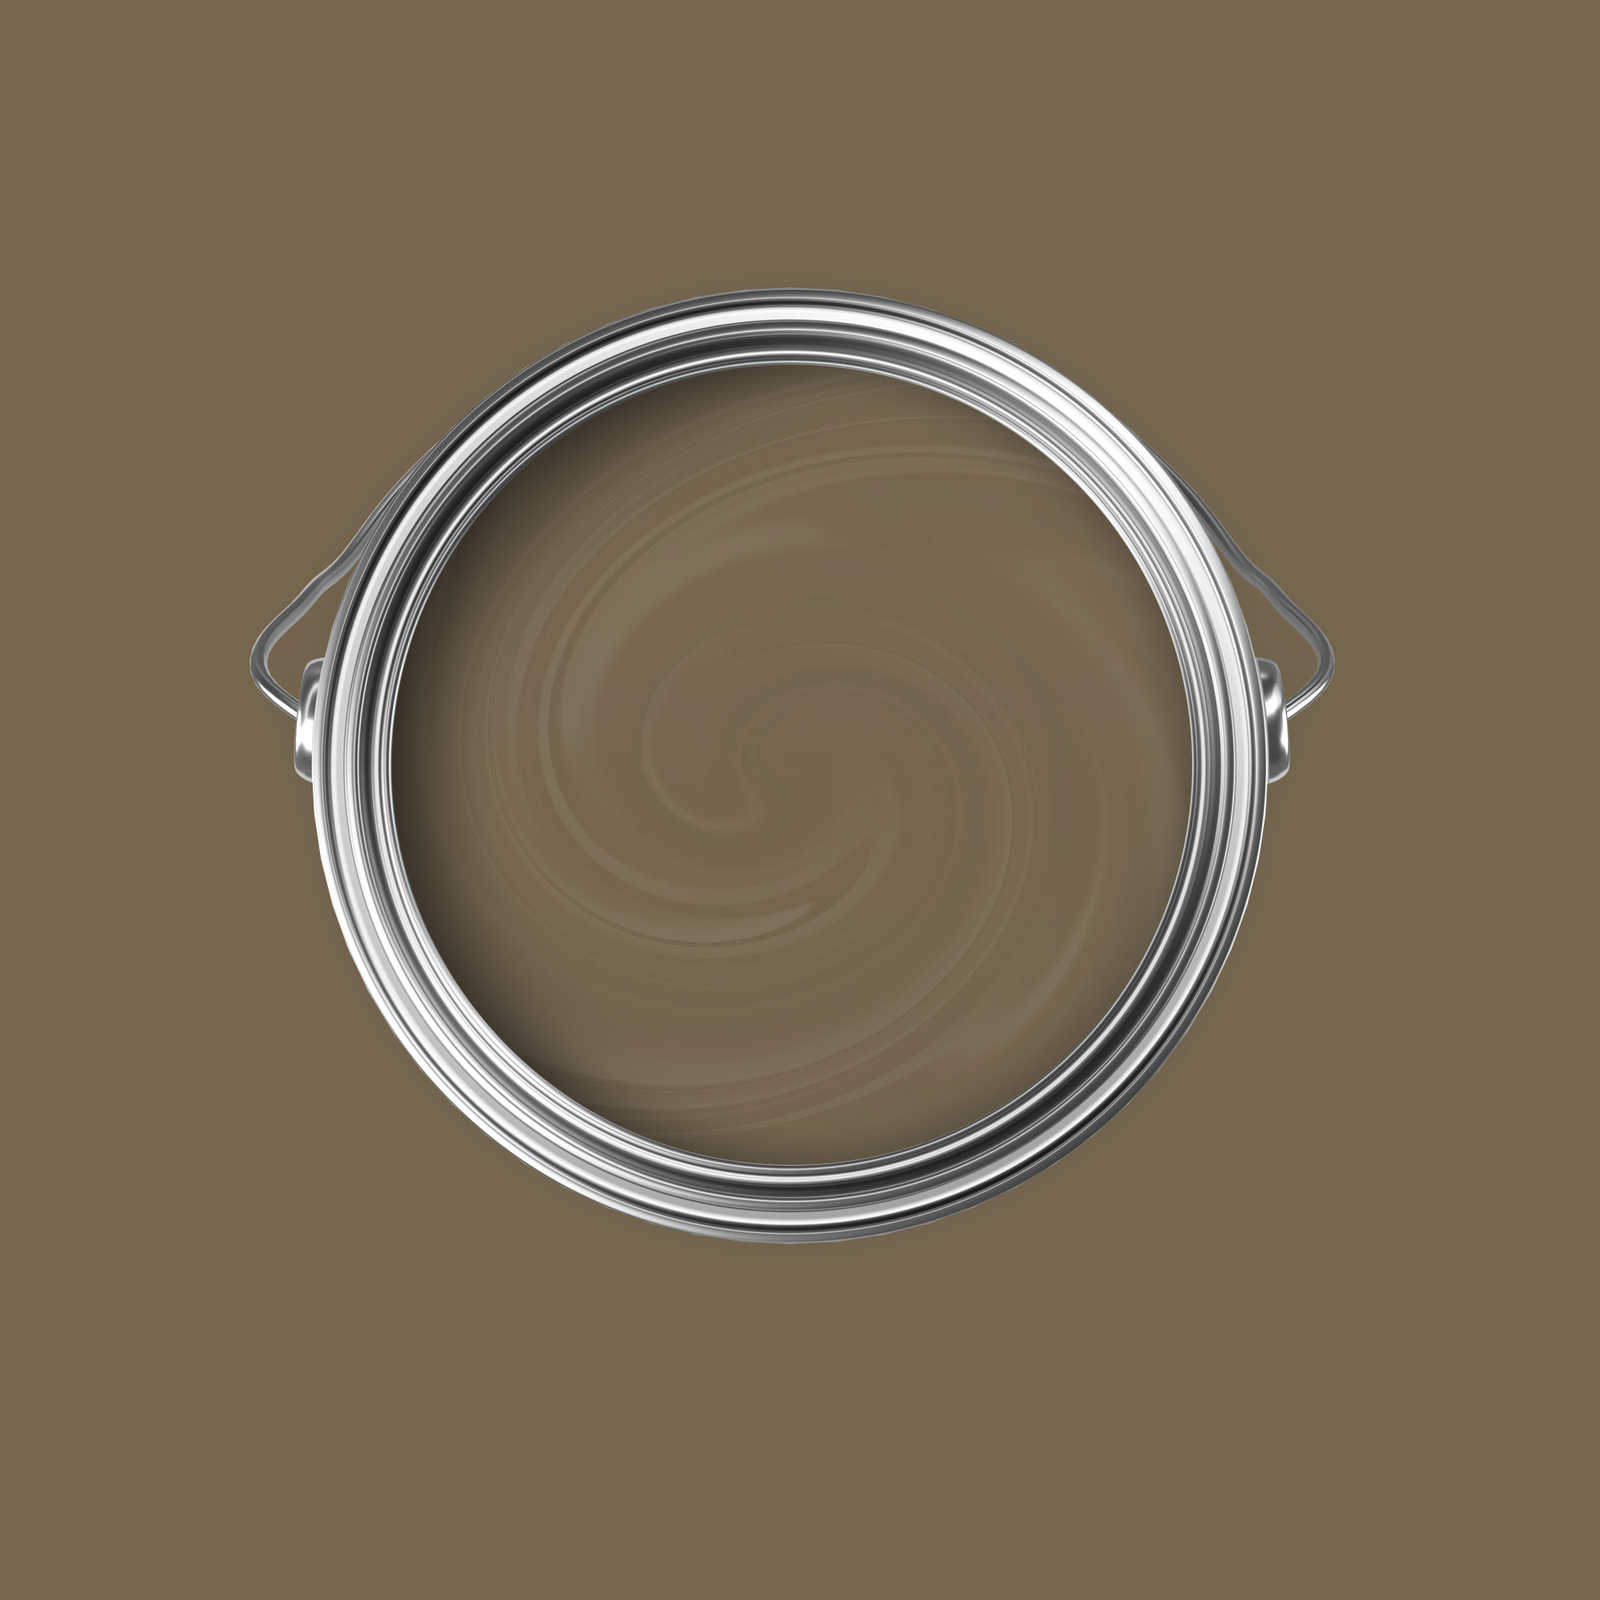             Premium Wall Paint Strong Khaki »Essential Earth« NW713 – 5 litre
        